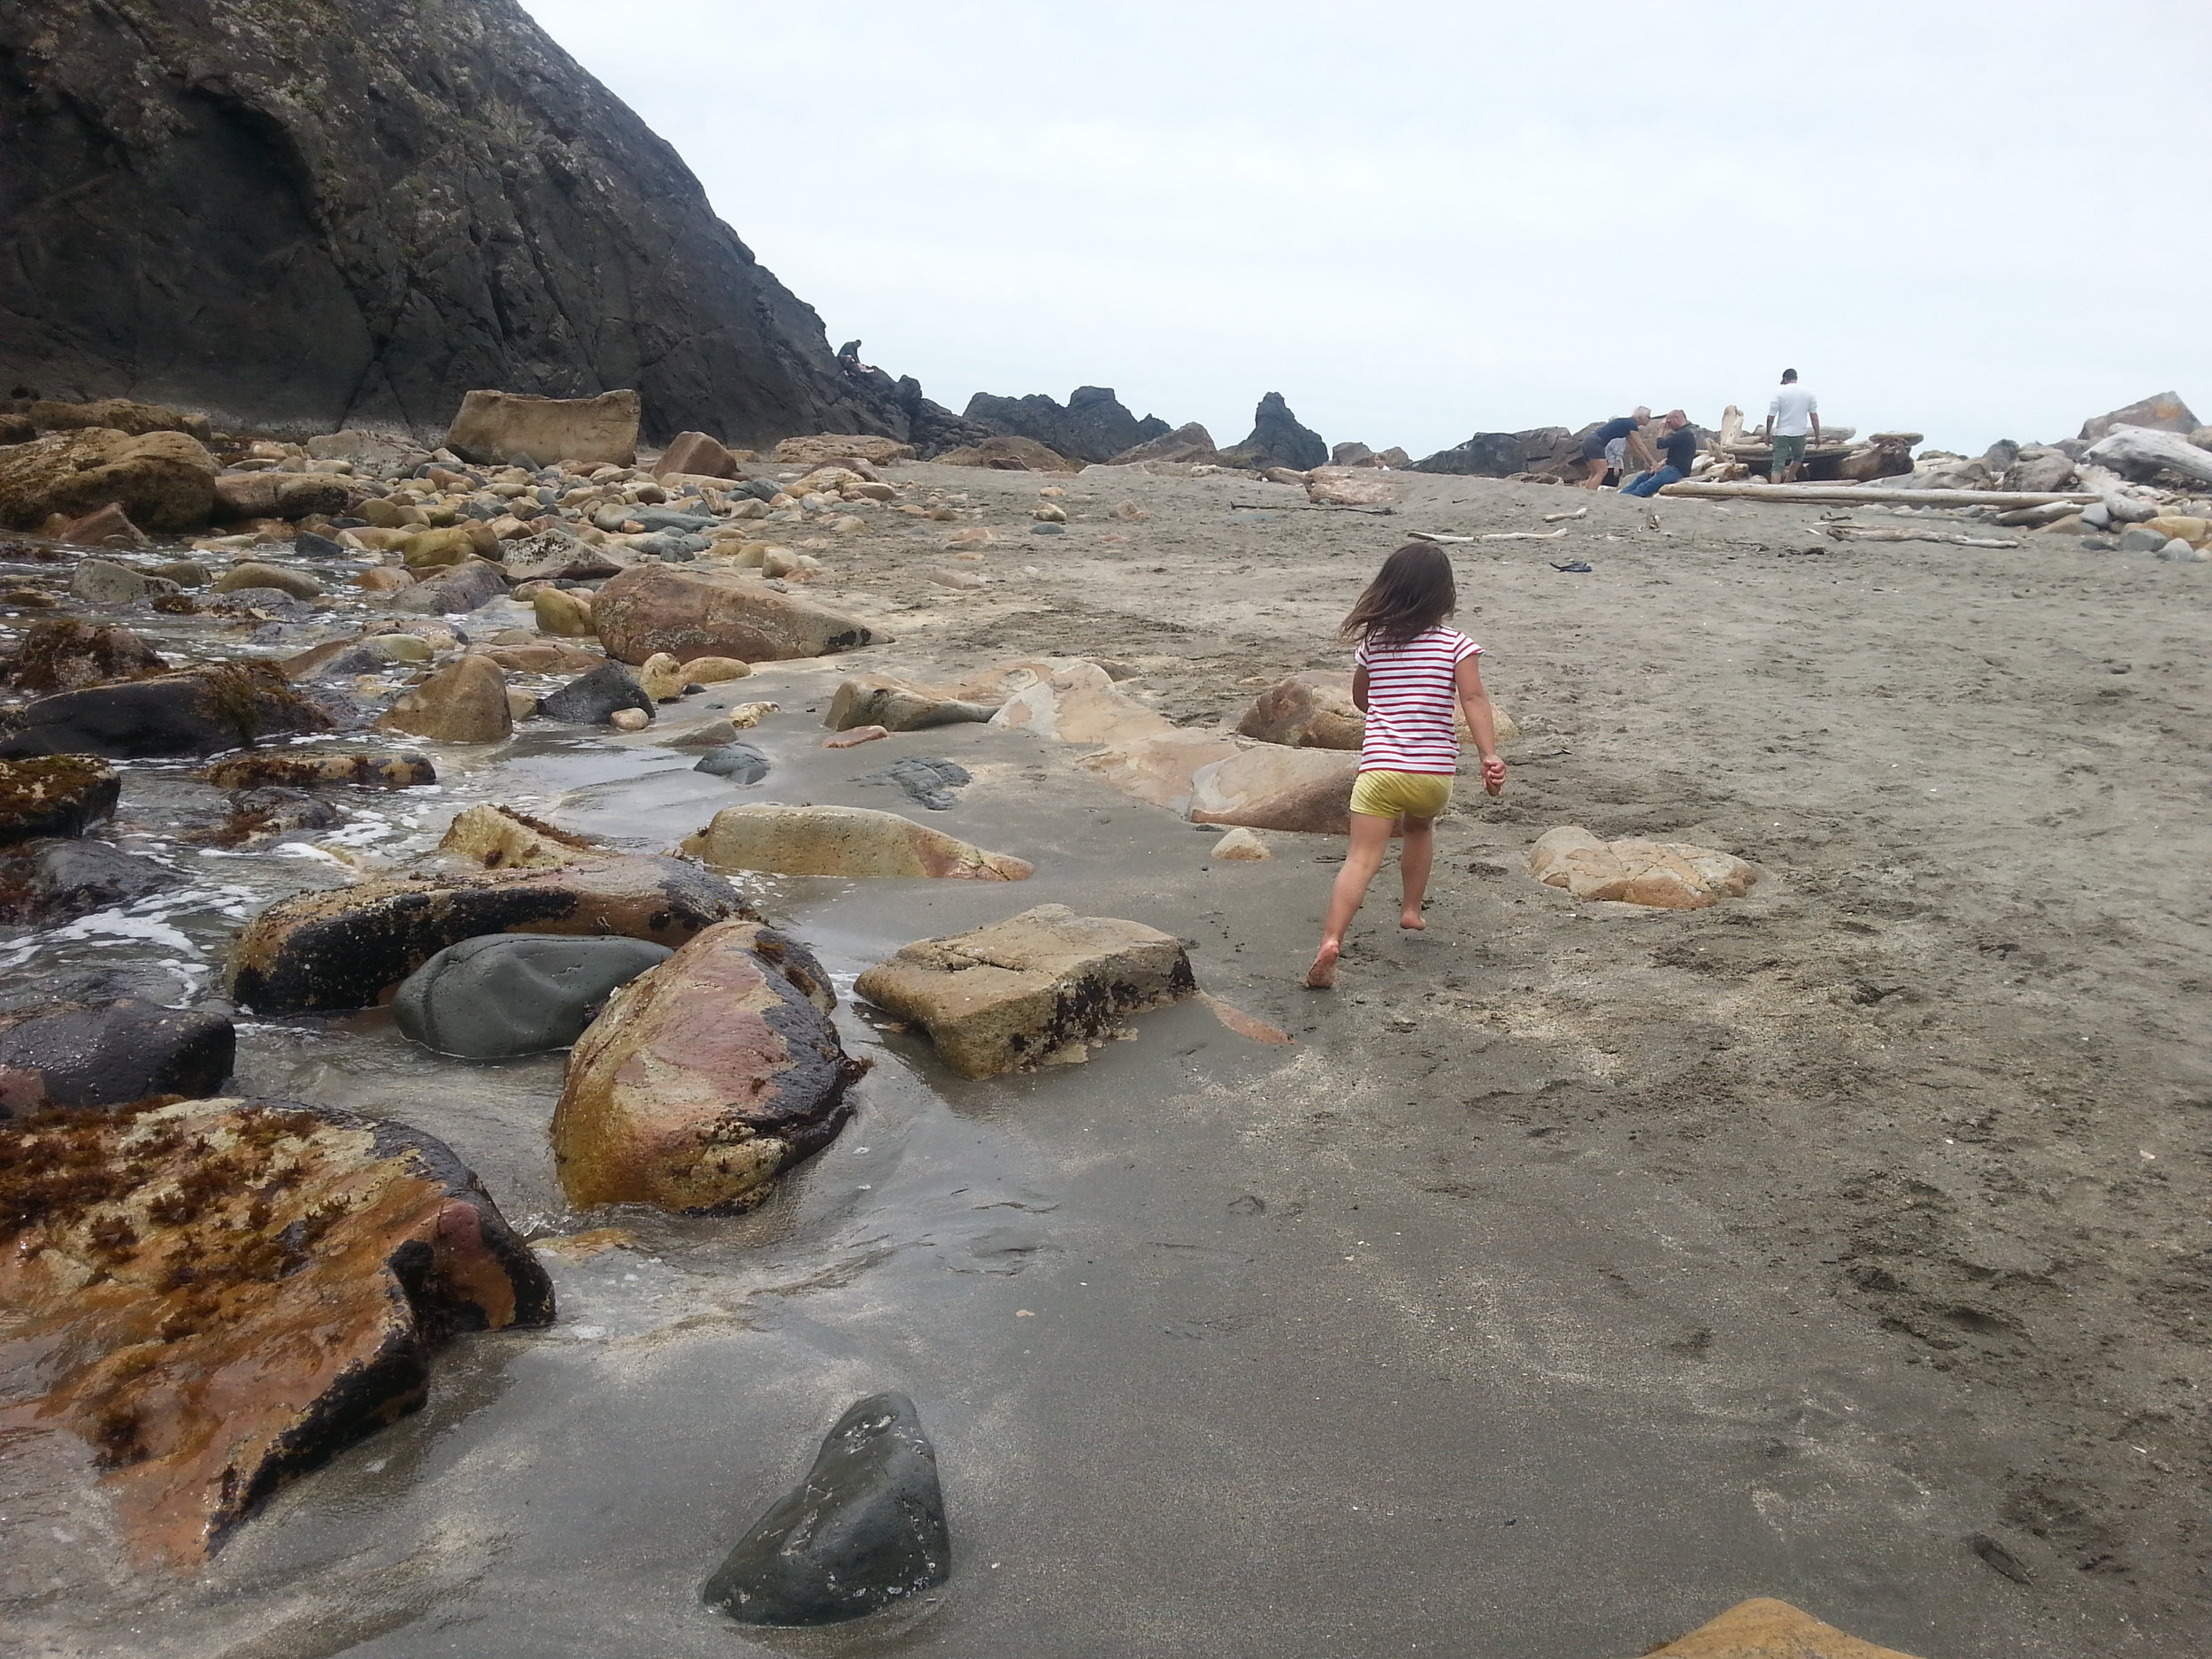 BROOKINGS HARBOR - What to do in Southern Oregon- Things to do - Events - Kids - Family - Camping